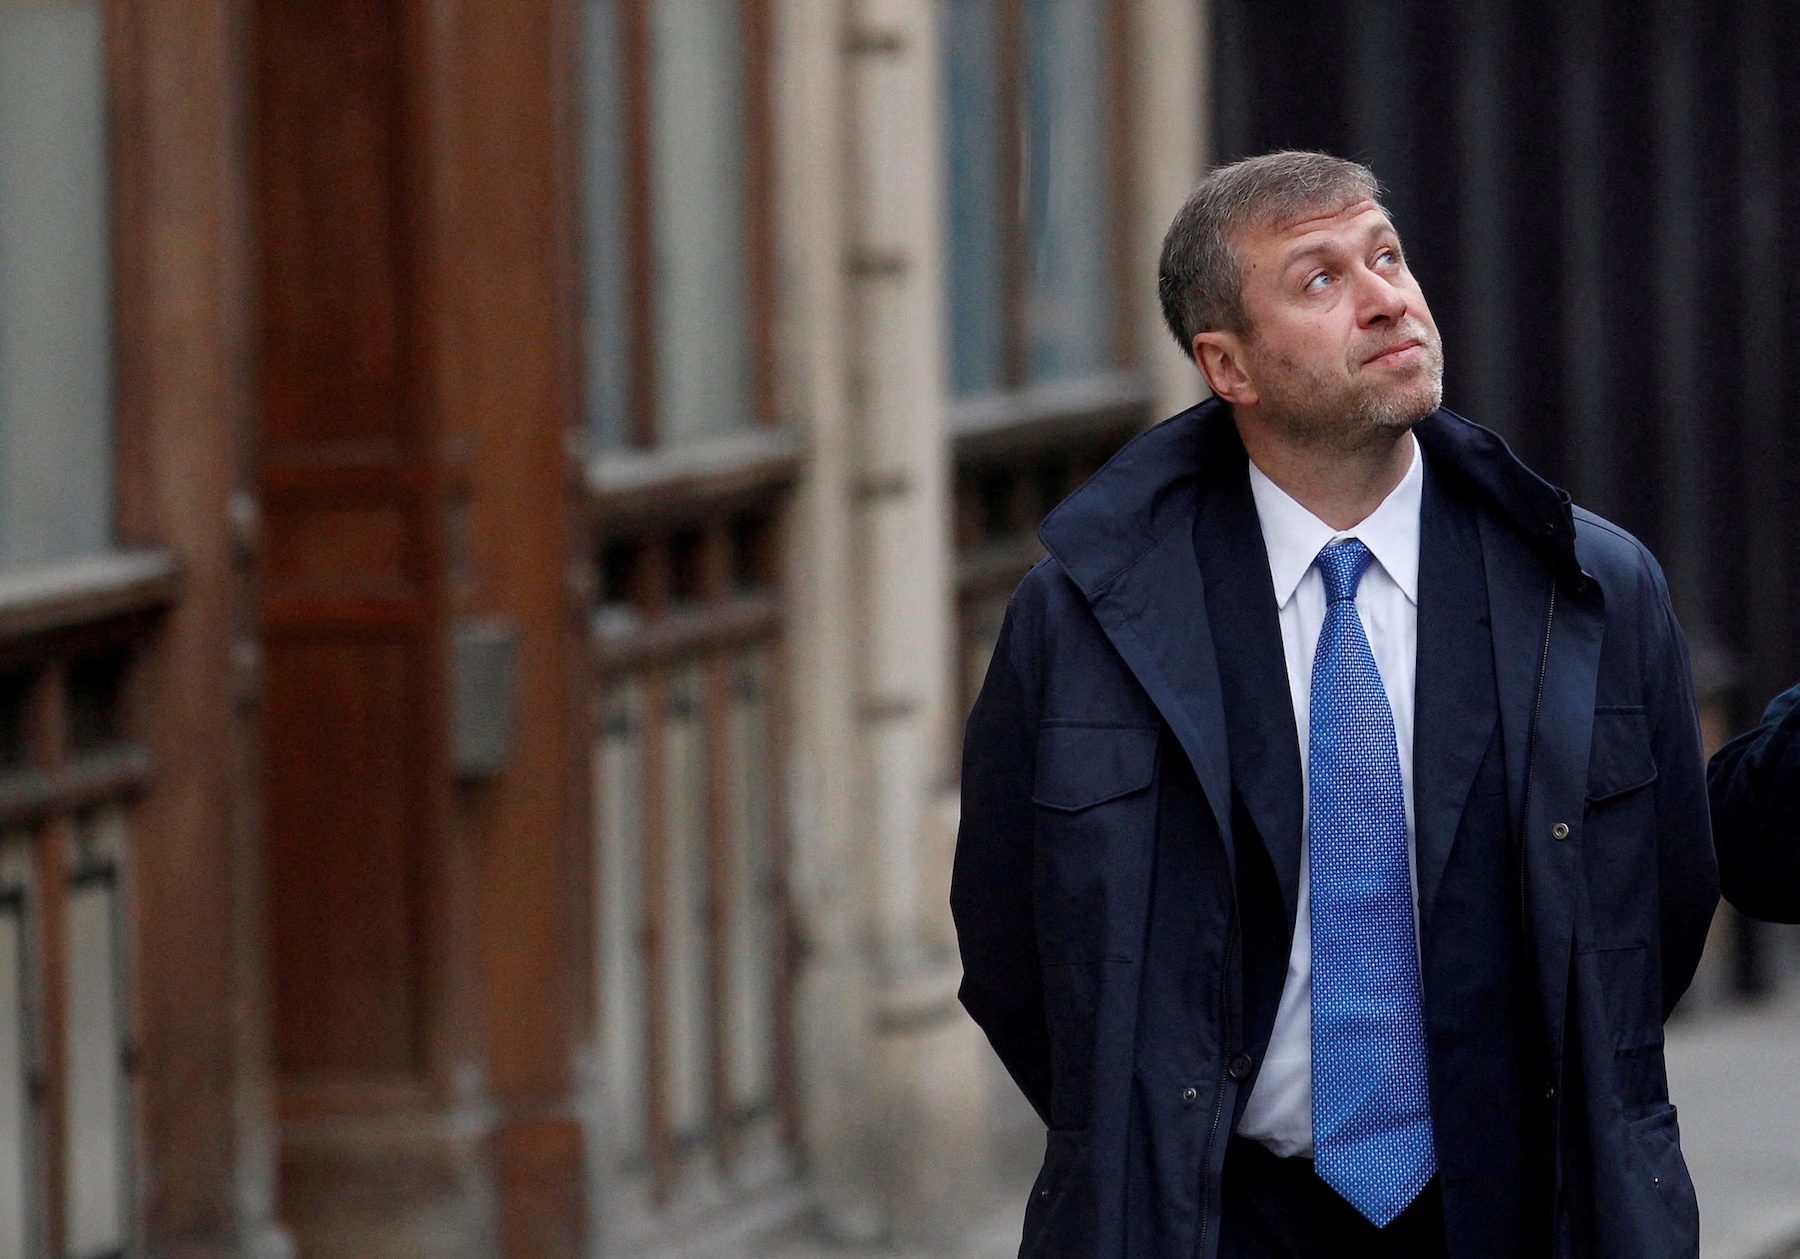 EU blacklists Abramovich, targets energy, luxury sectors with new Russia sanctions